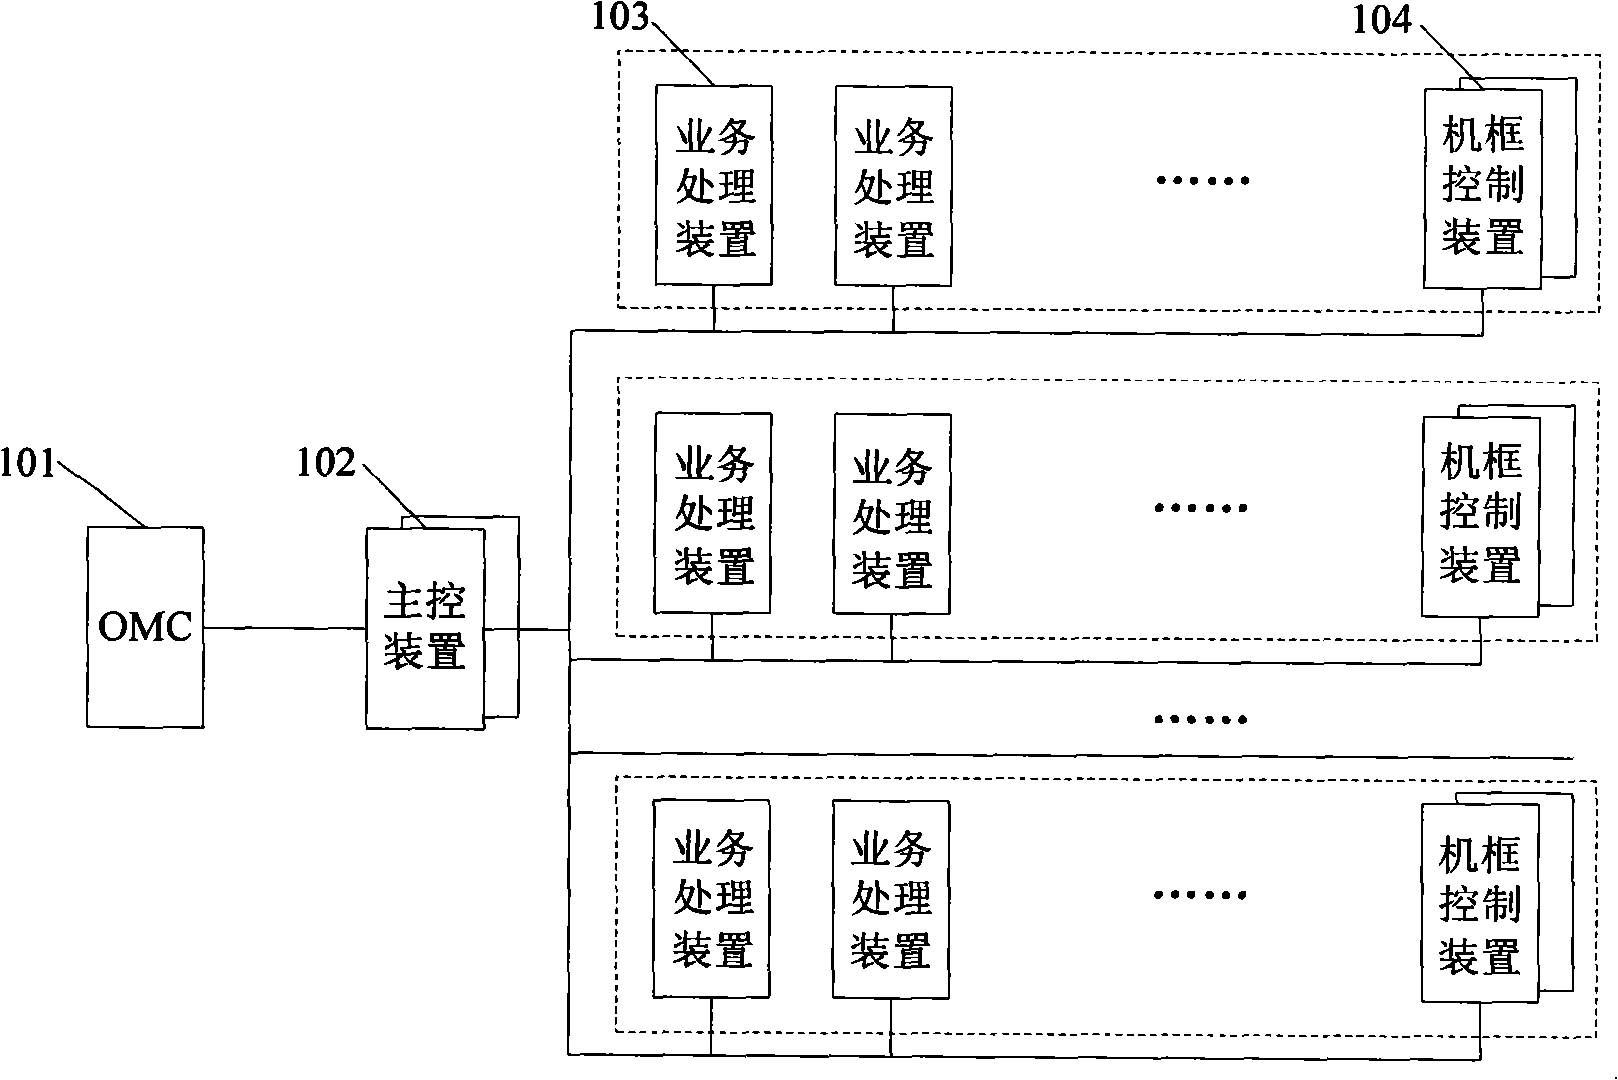 Distributed system capable of implementing energy saving and consumption lowering, and control method for energy saving and consumption lowering